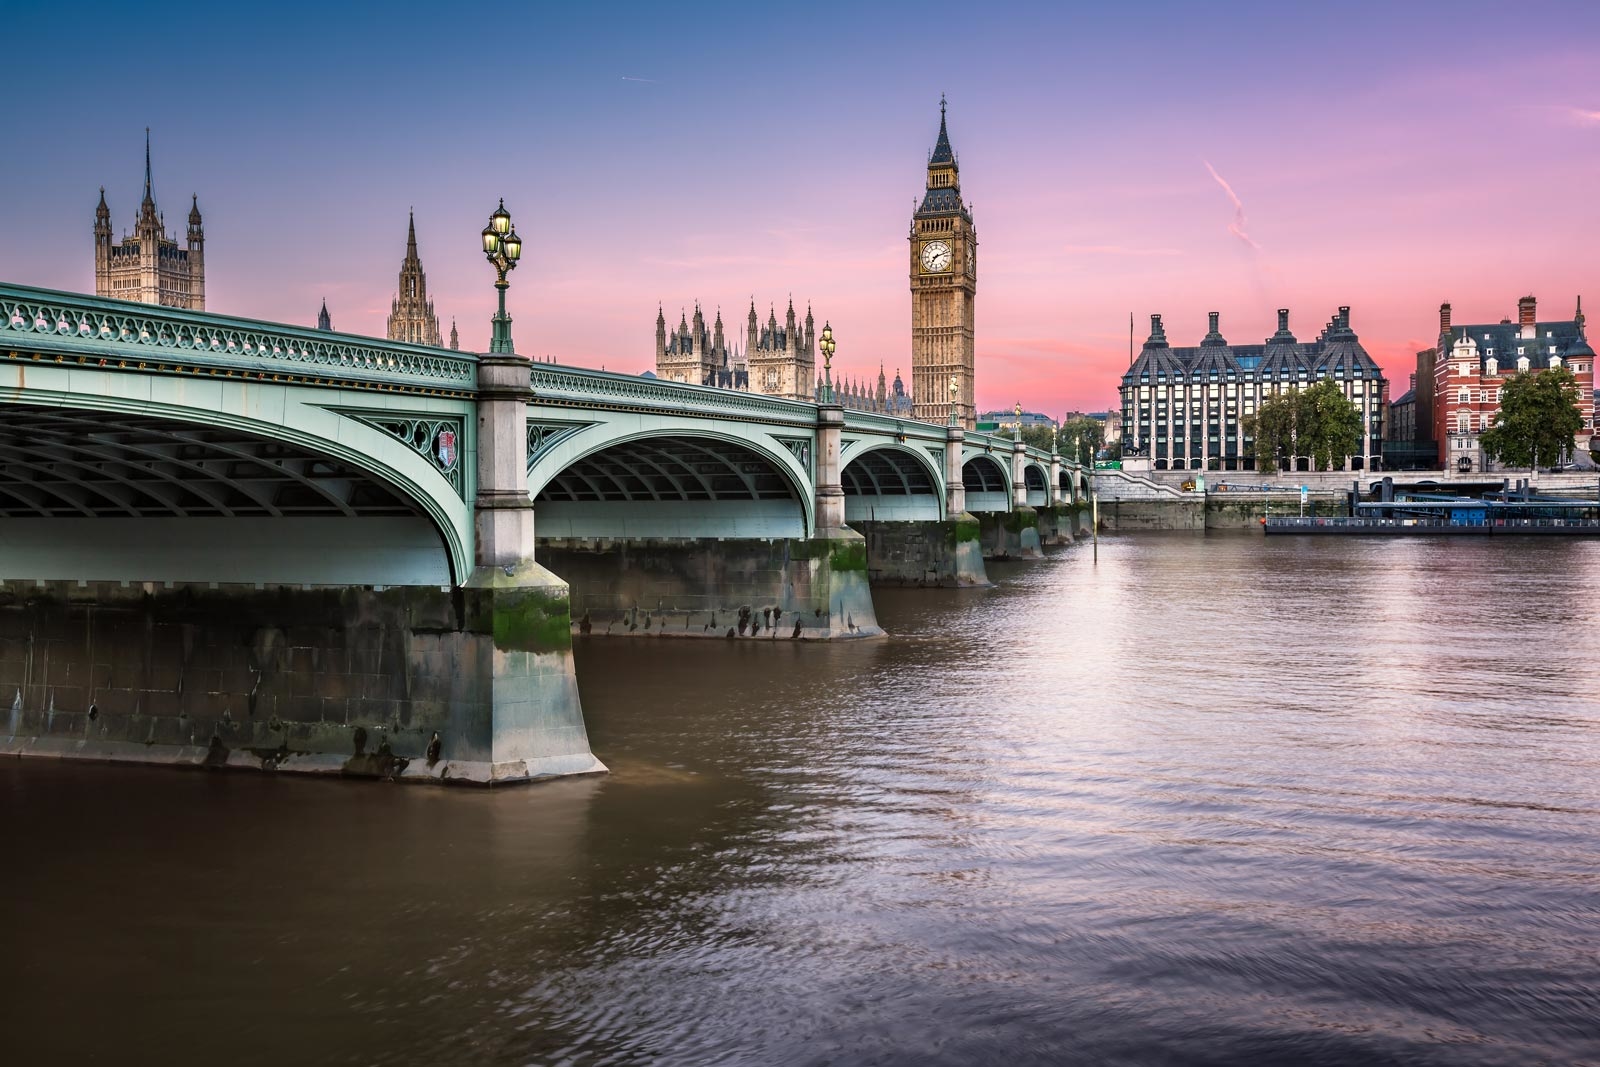 How to Visit the Palace of Westminster in London